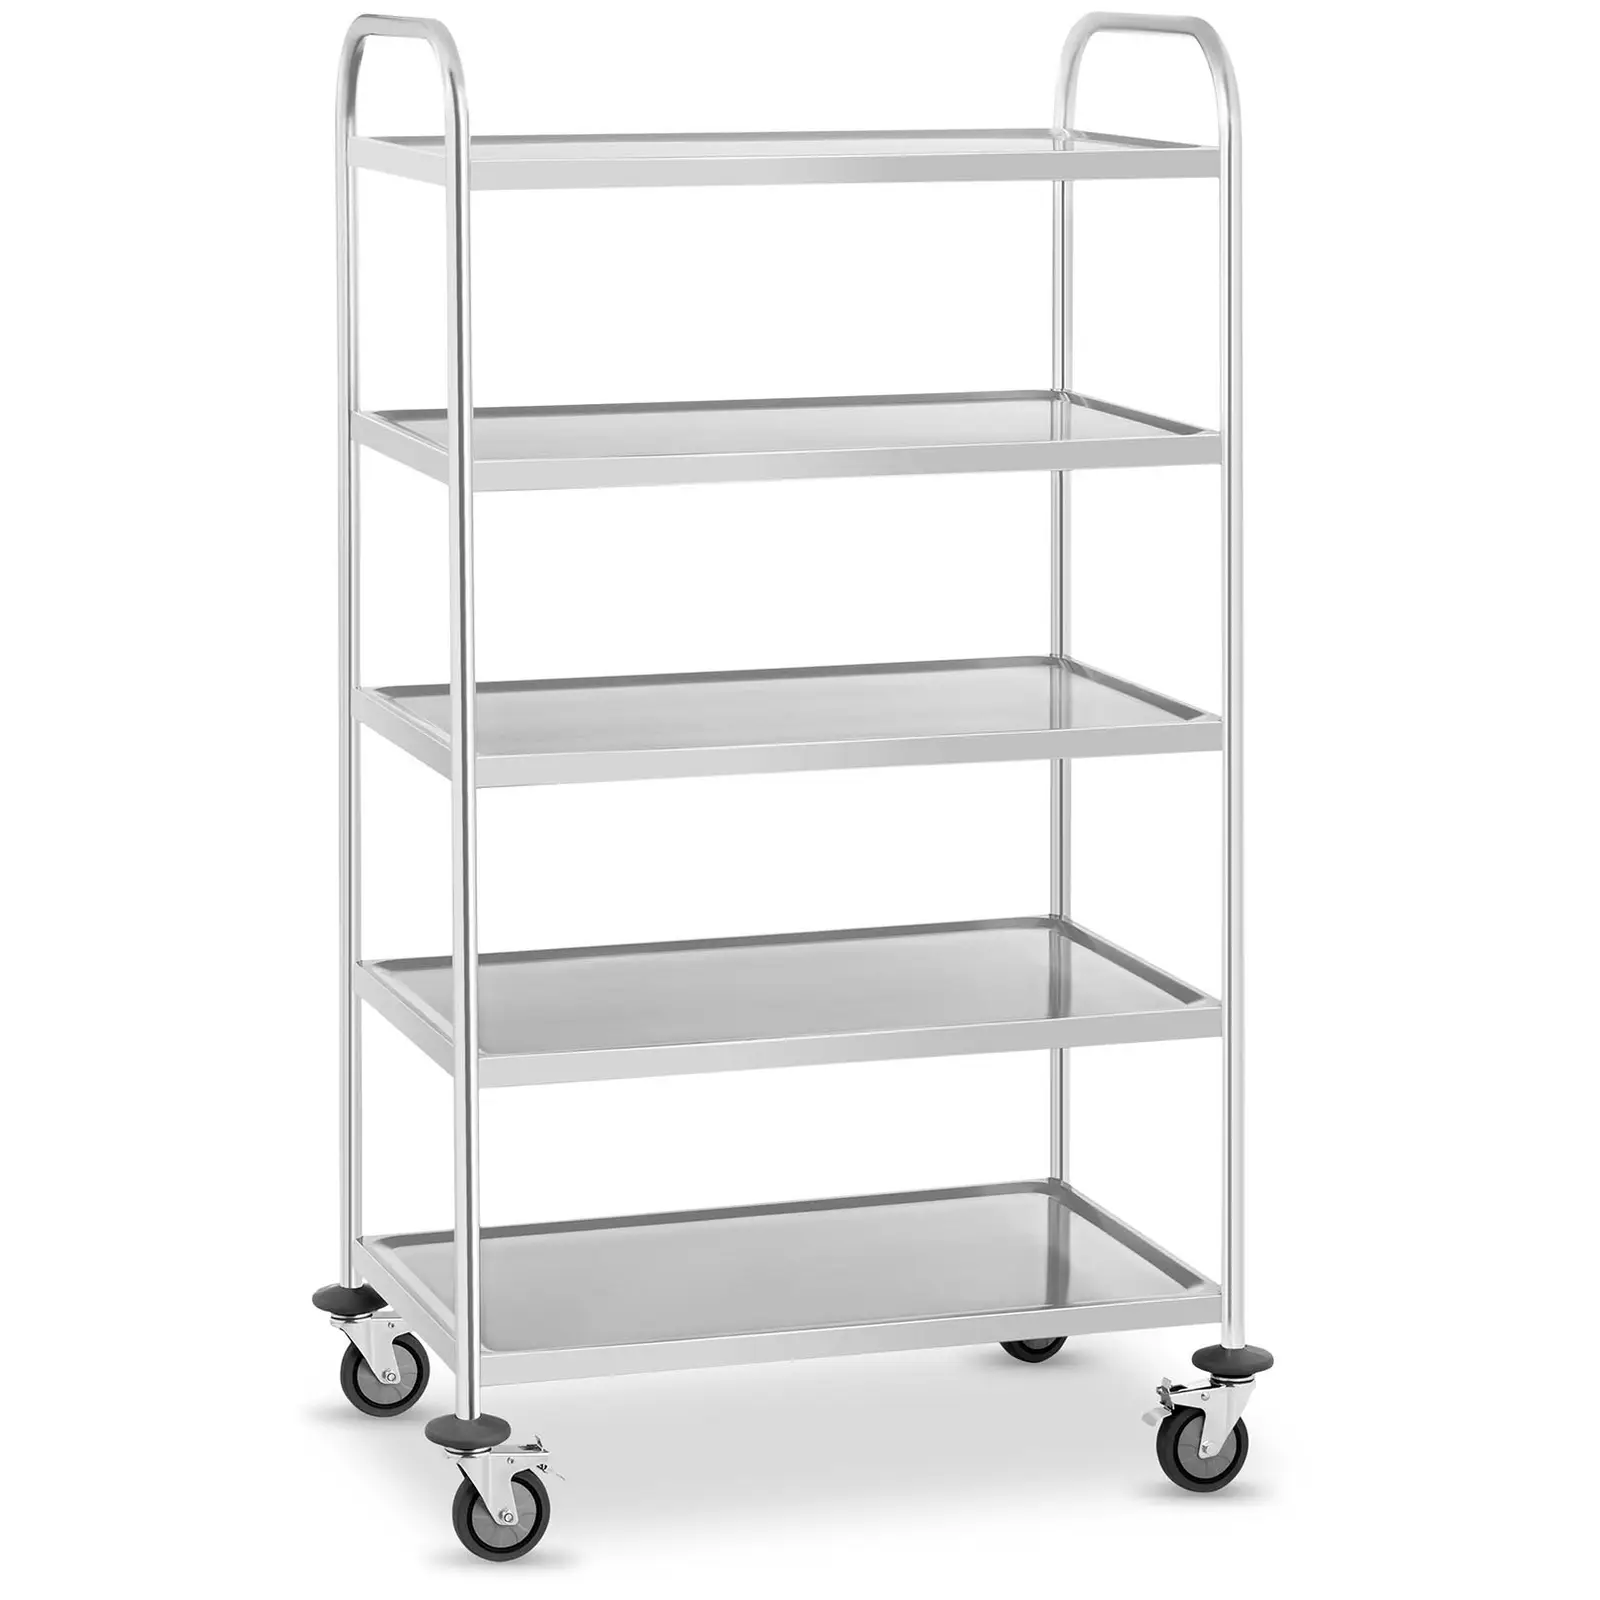 Stainless Steel Serving Trolley - 5 Shelves - Up To 250 kg